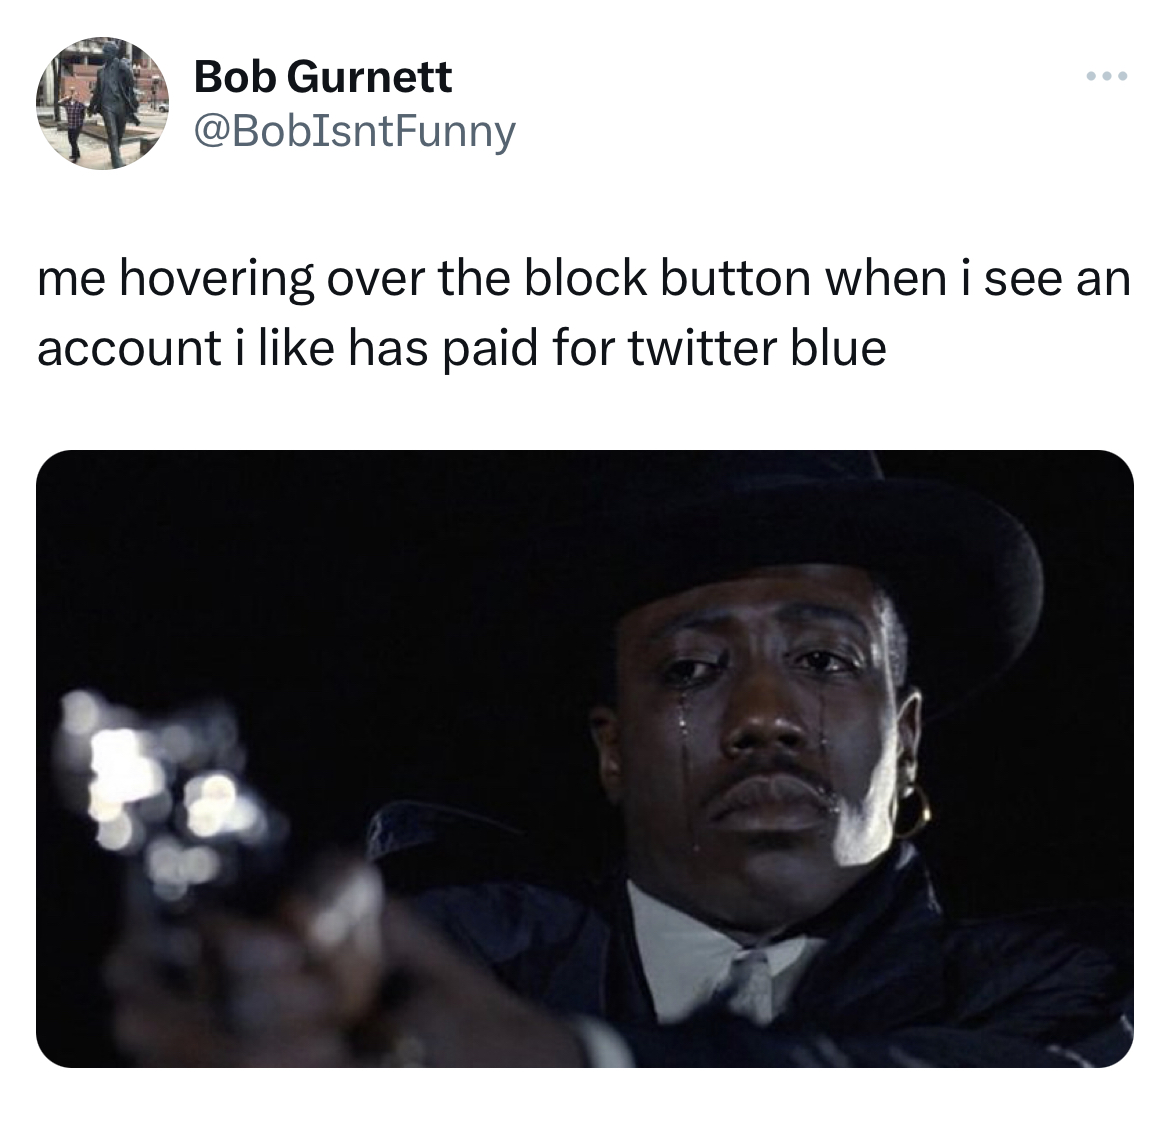 savage and salty tweets - photo caption - Bob Gurnett me hovering over the block button when i see an account i has paid for twitter blue